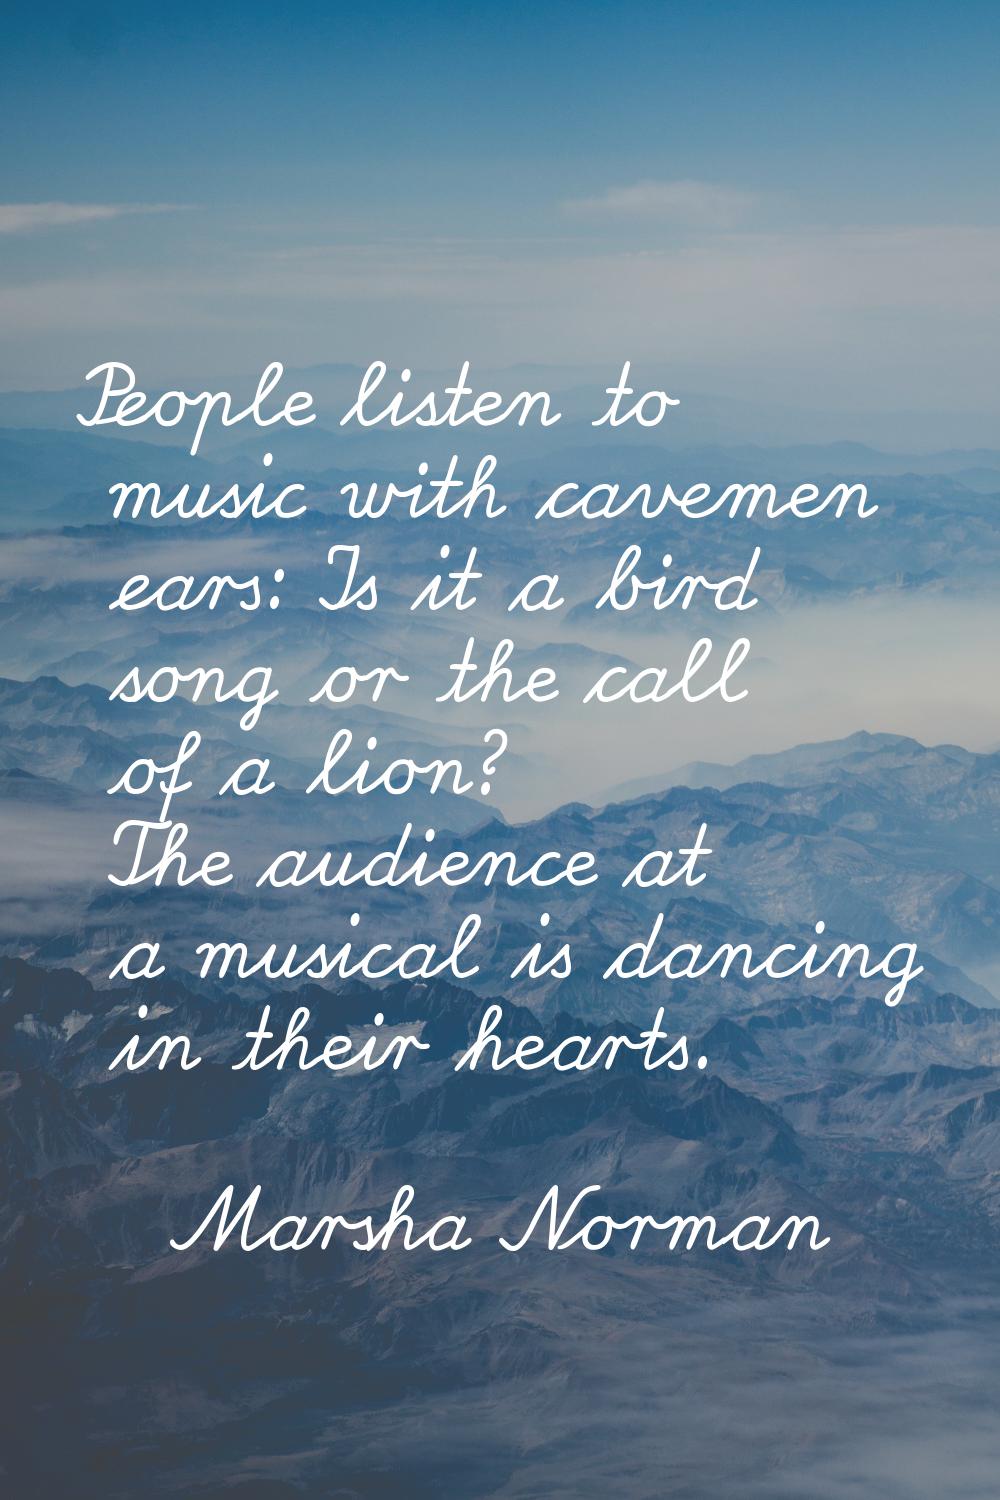 People listen to music with cavemen ears: Is it a bird song or the call of a lion? The audience at 